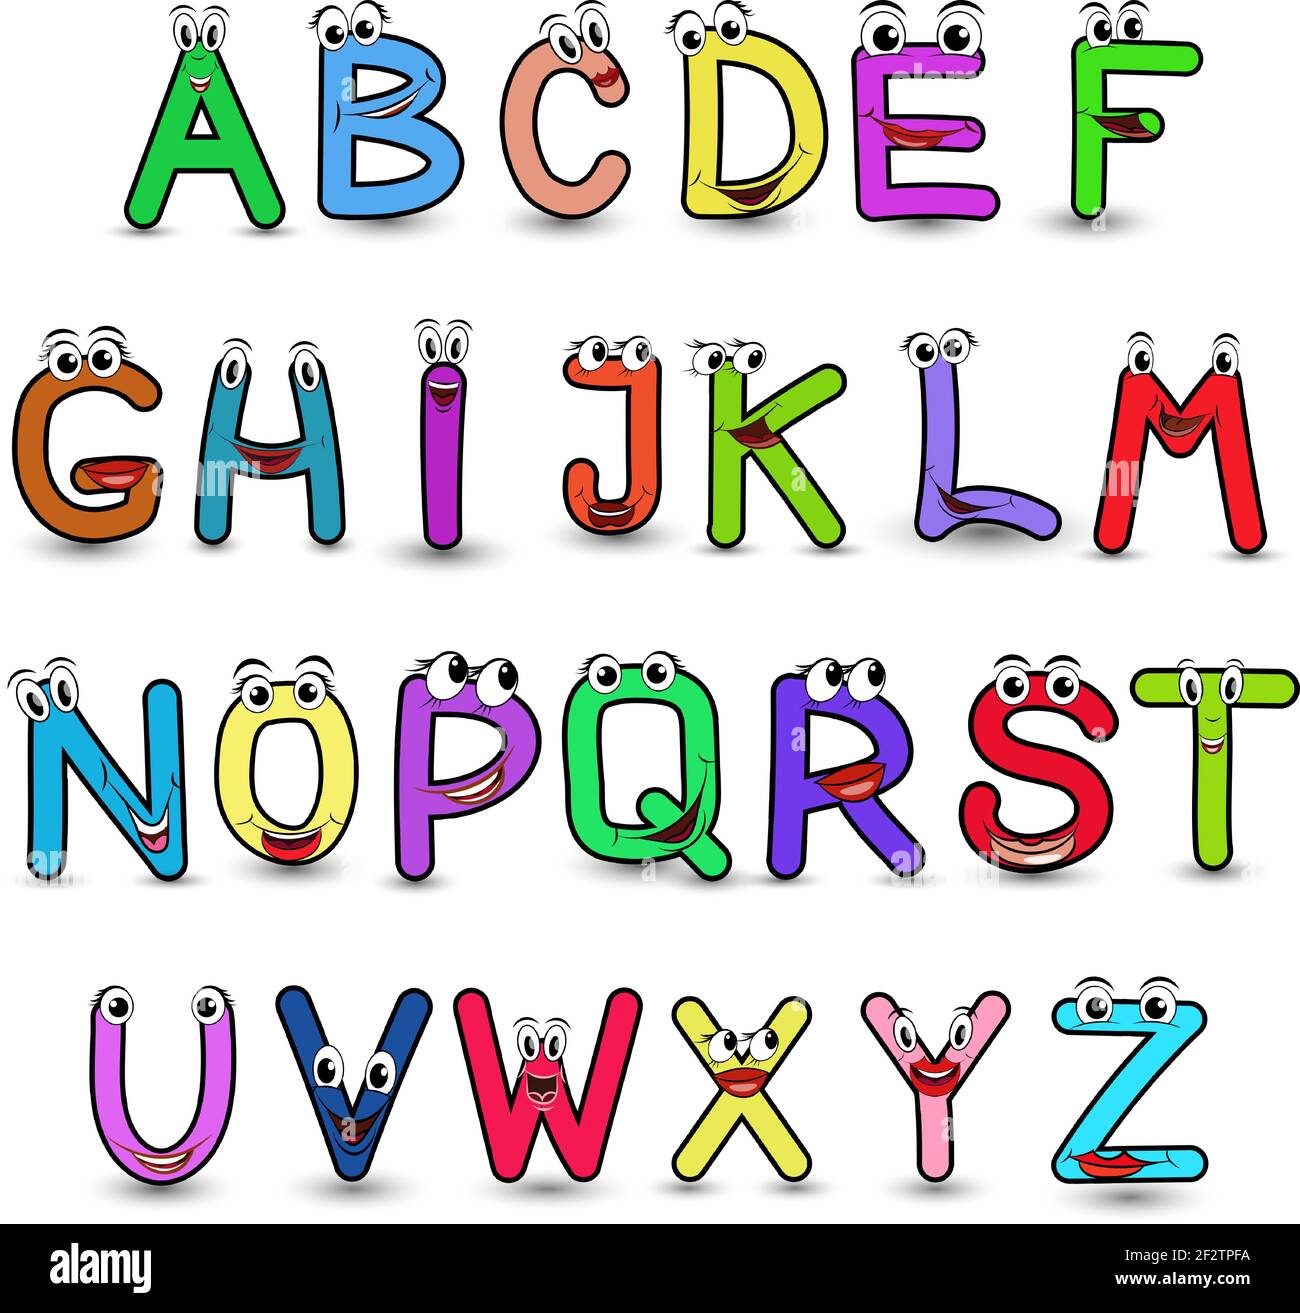 Incredible Collection of Full 4K Alphabet Letter Images: 999+ Top Choices